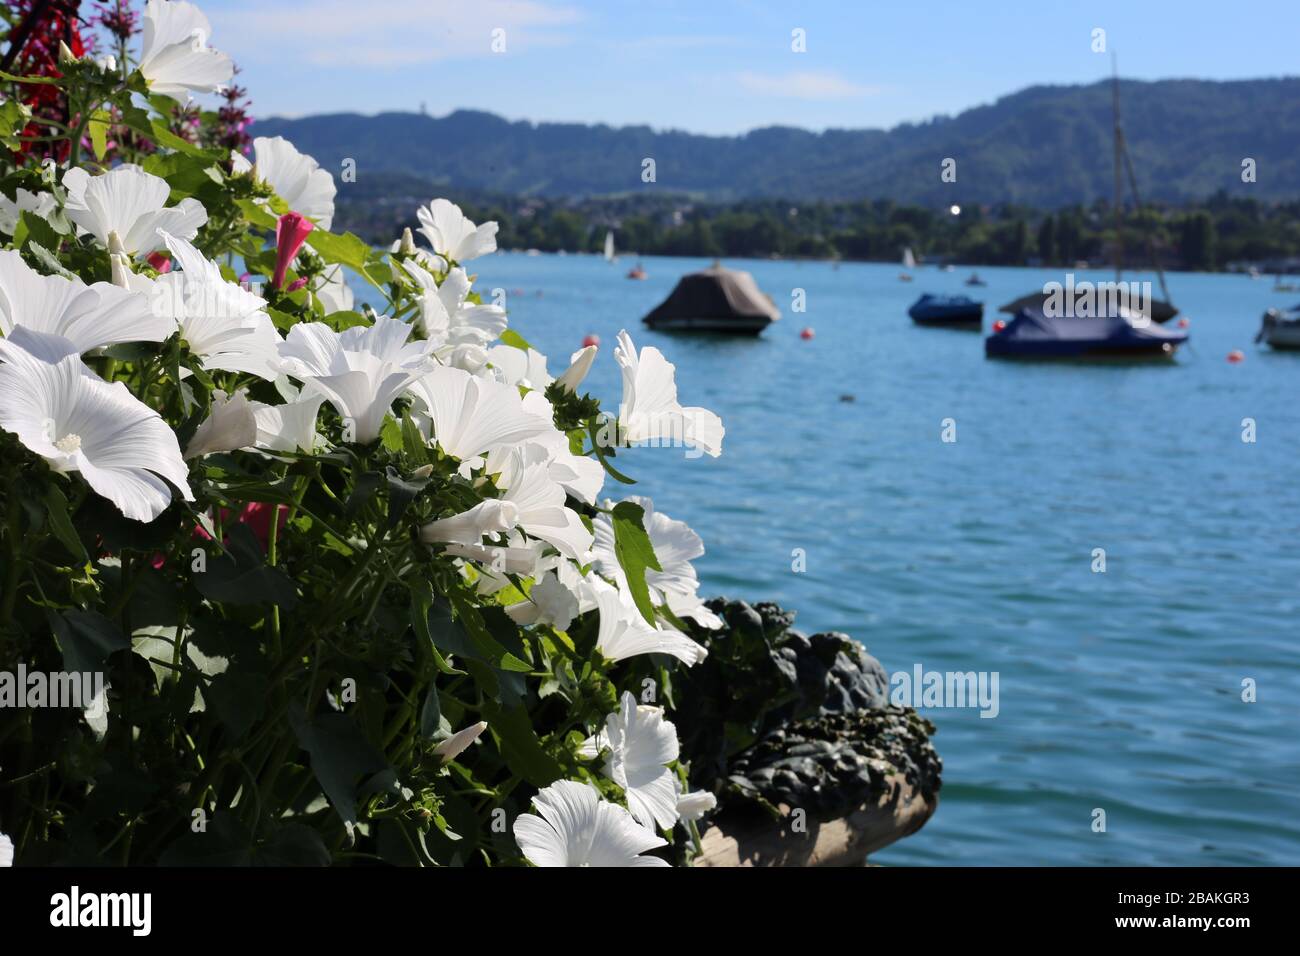 Limmat river located in Zürich, Switzerland, July 2018. In this photo you can see white petunia flowers in the foreground and turquoise river water... Stock Photo